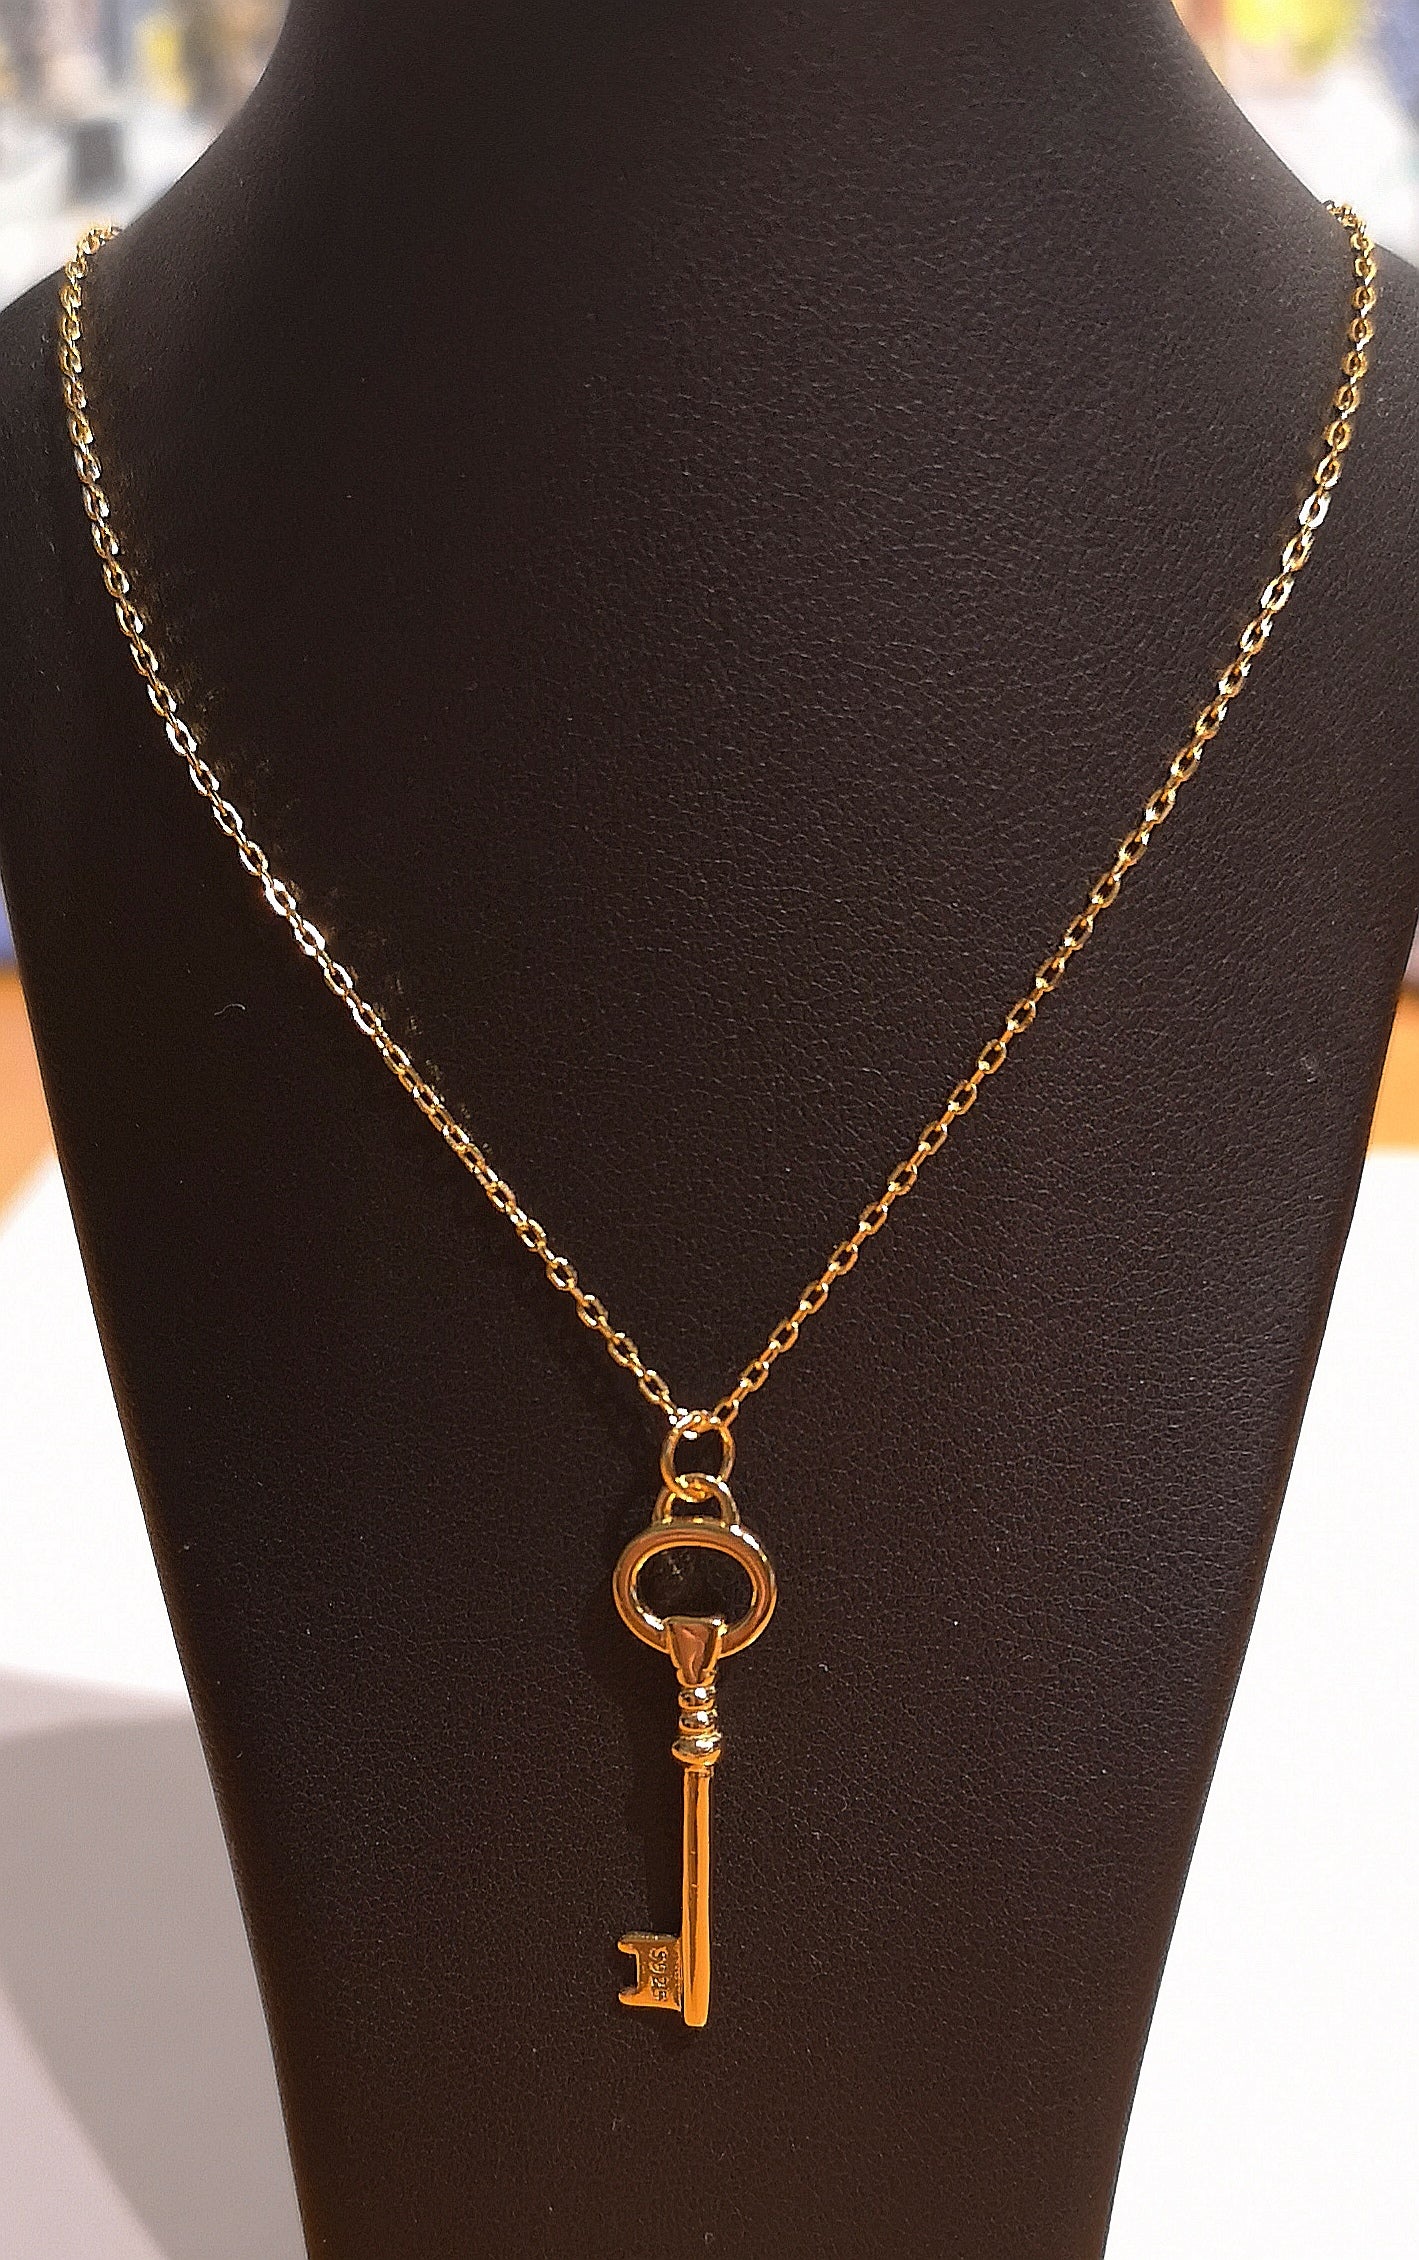 Gold plated sterling silver key necklace